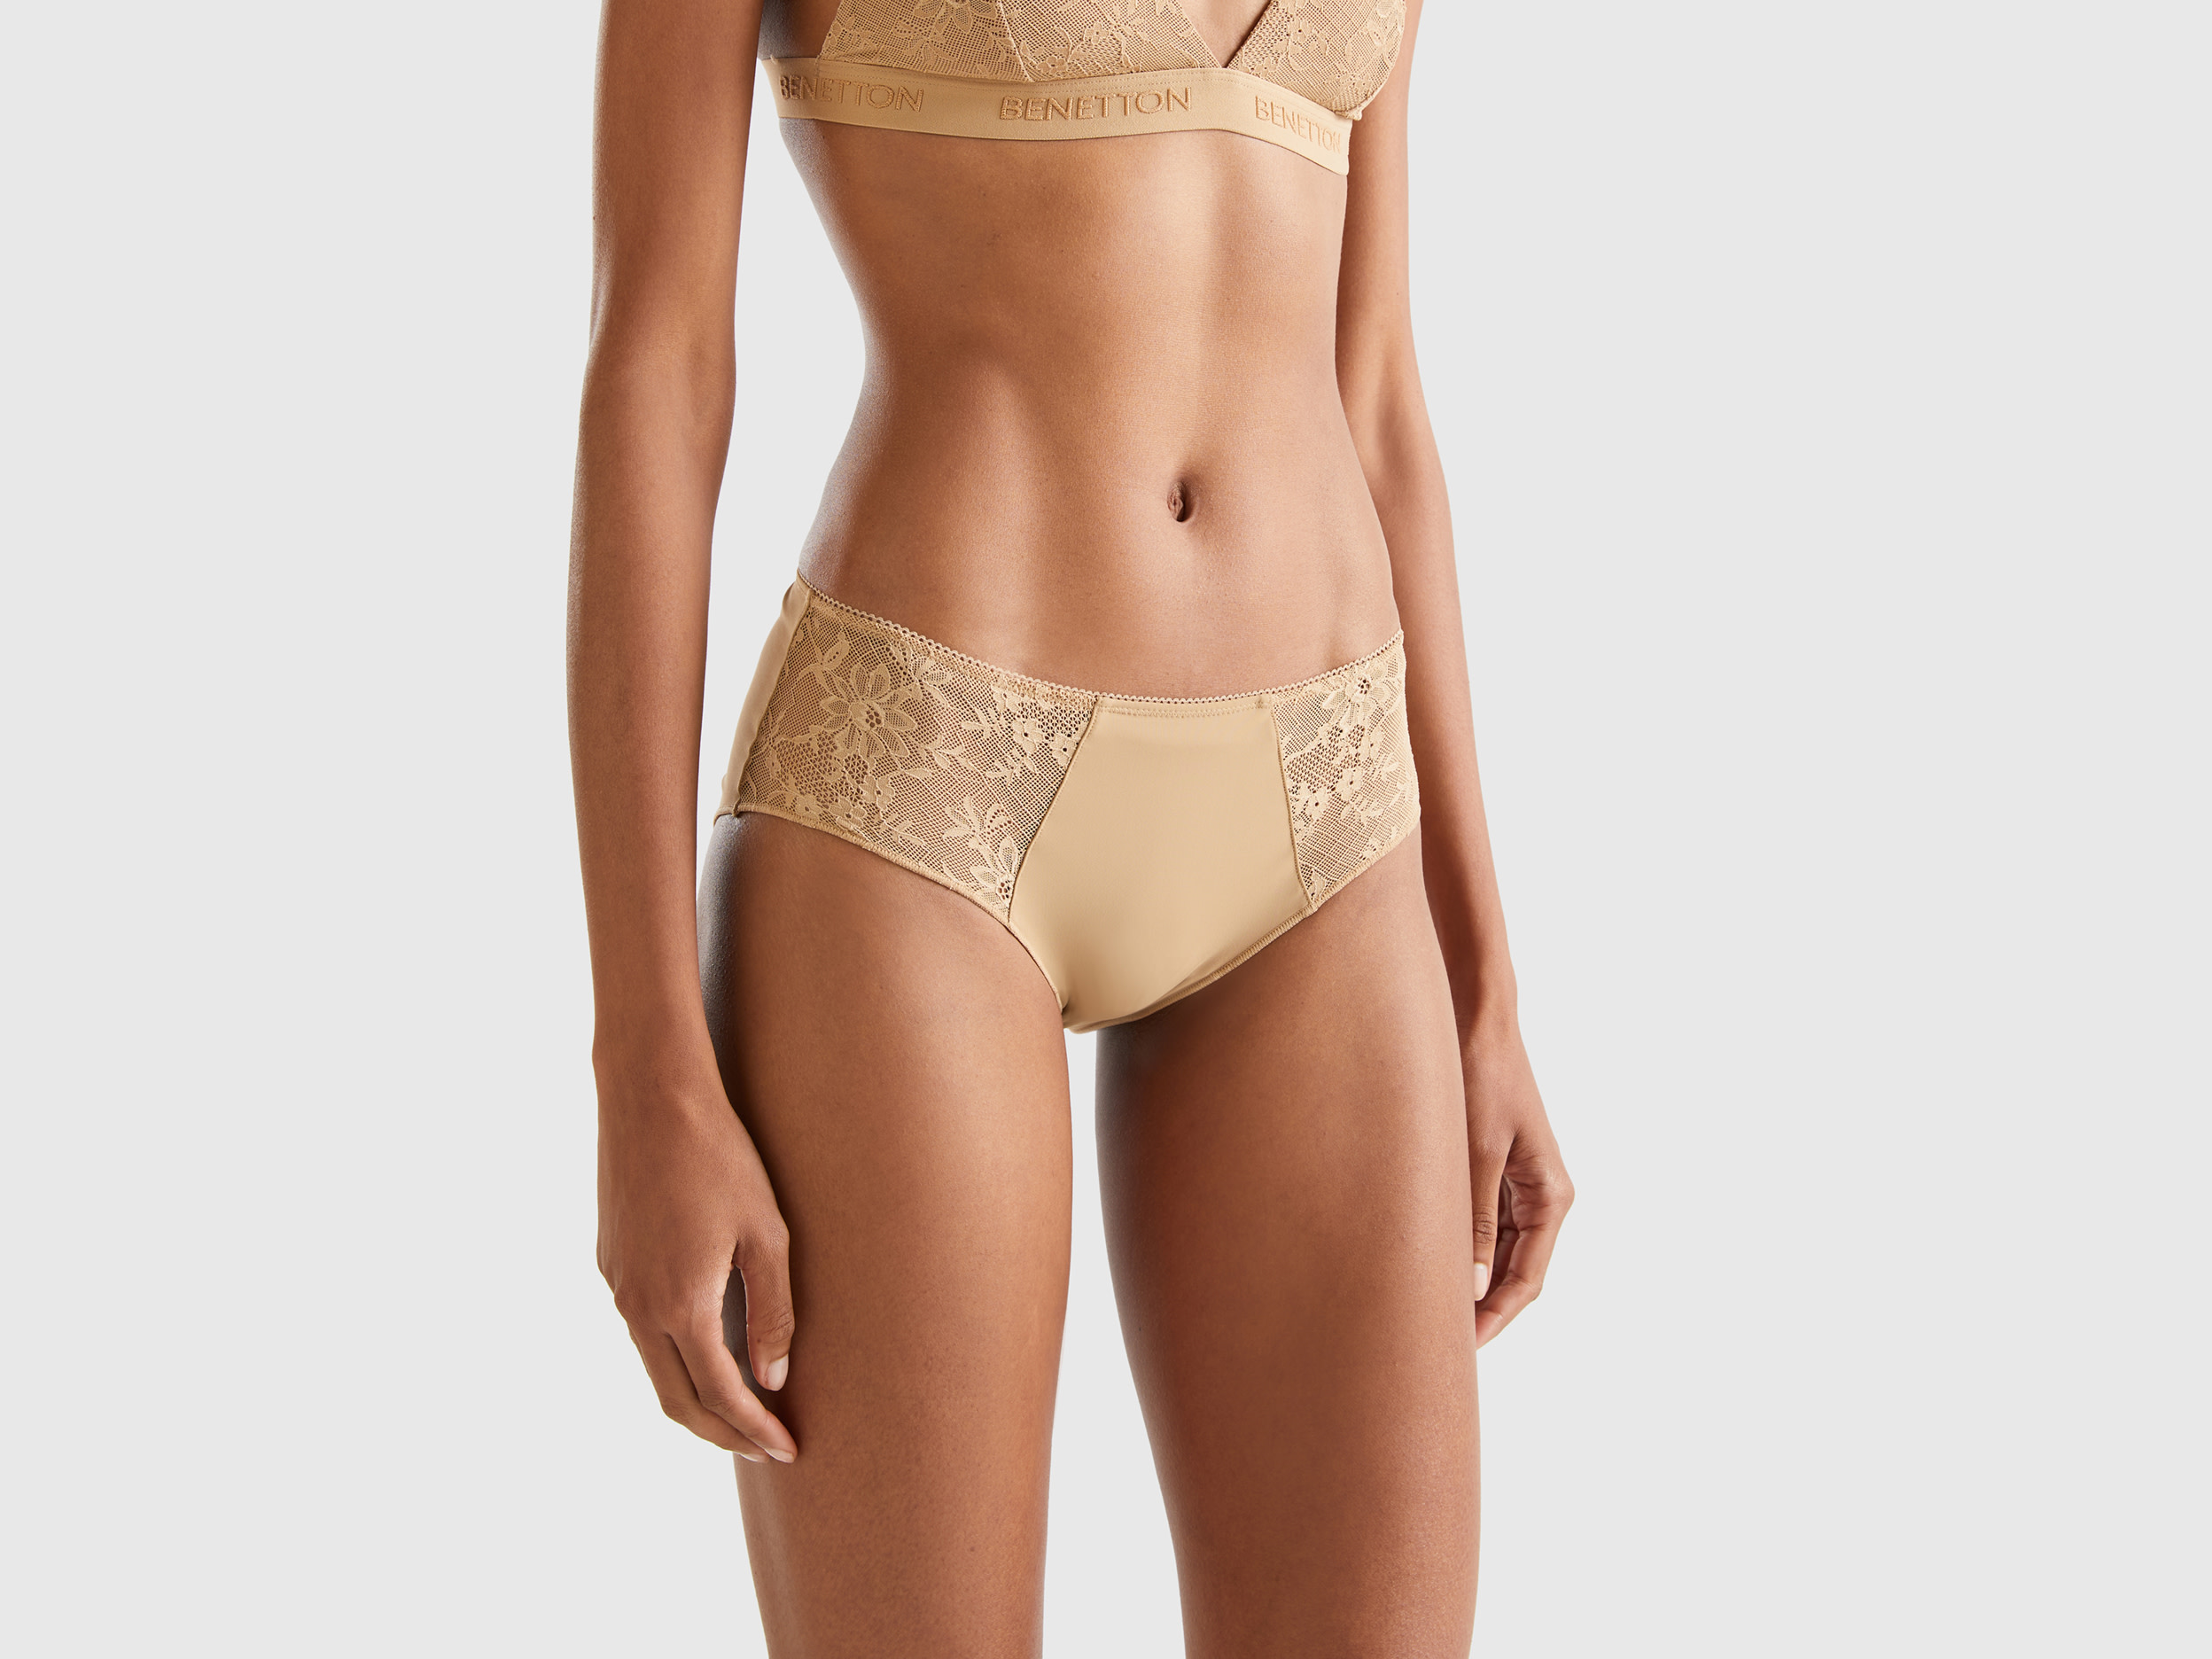 Benetton, Briefs In Lace And Microfiber, size XS, Camel, Women